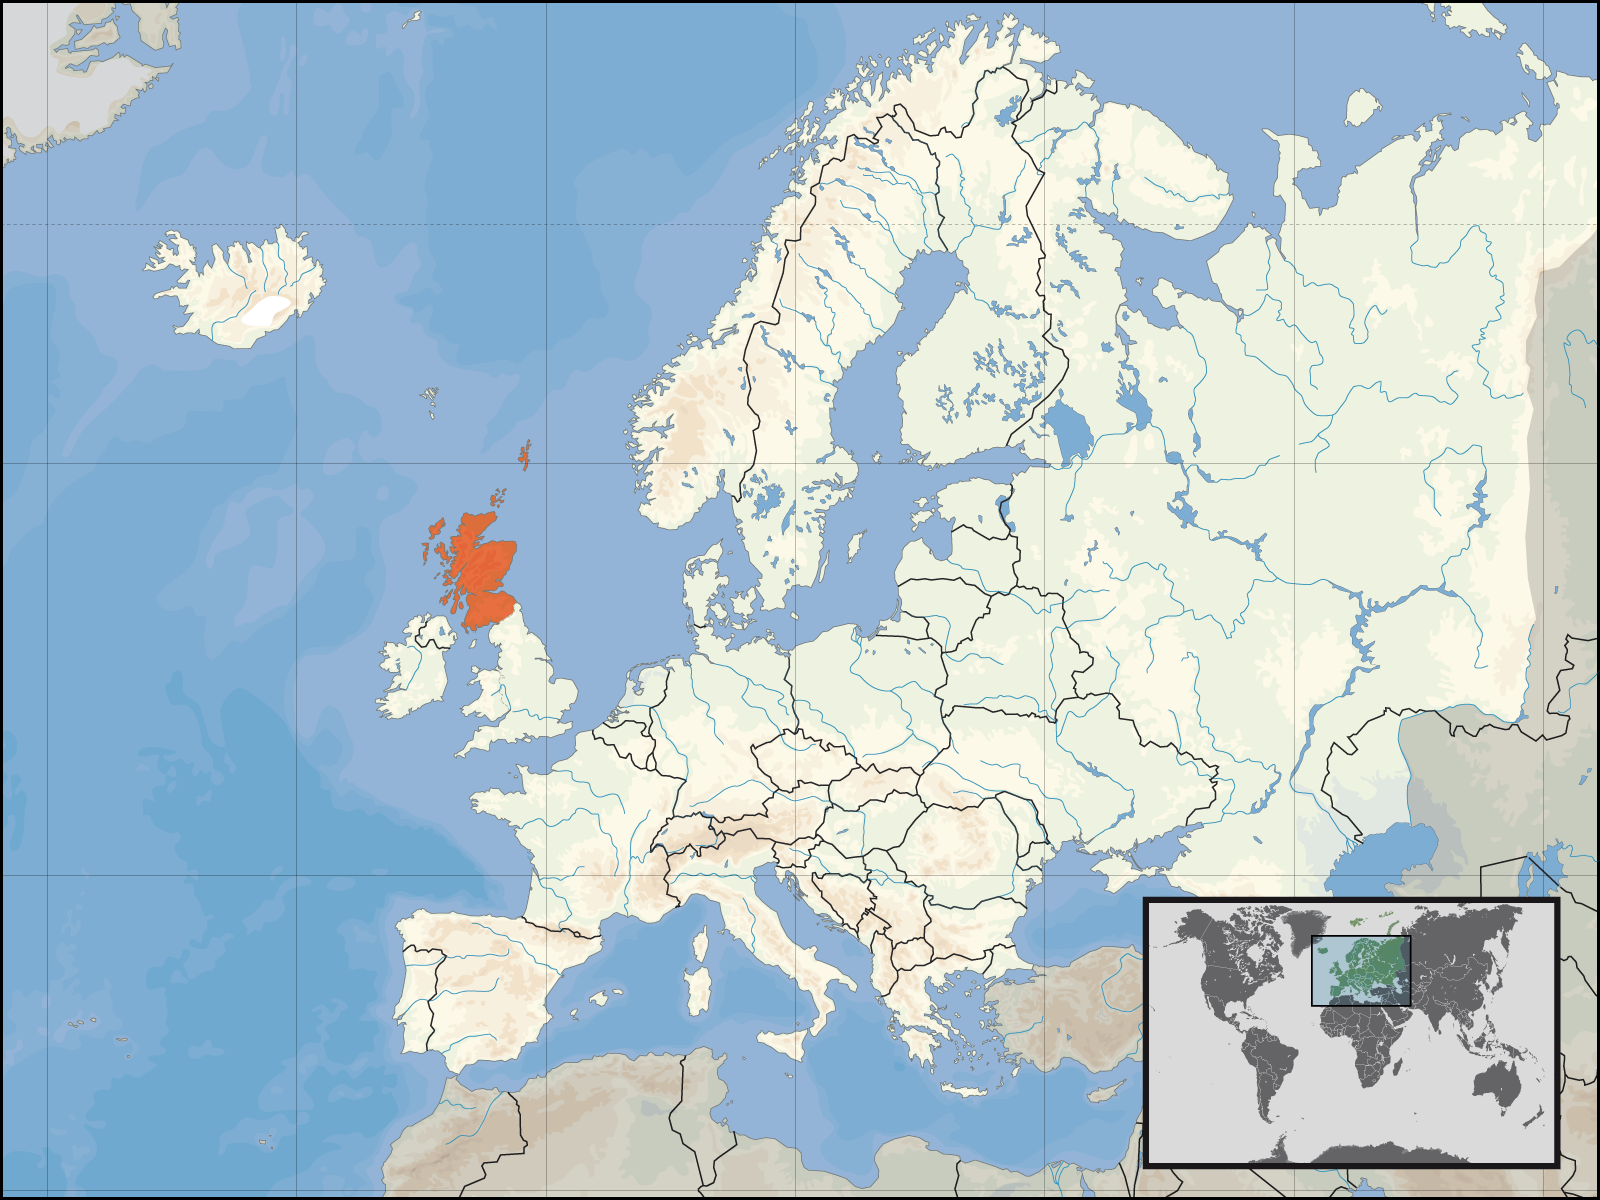 Map of an independent Scotland's location within Europe. On September 18, 2014, Scotland will vote on whether to leave the UK to become an independent country.